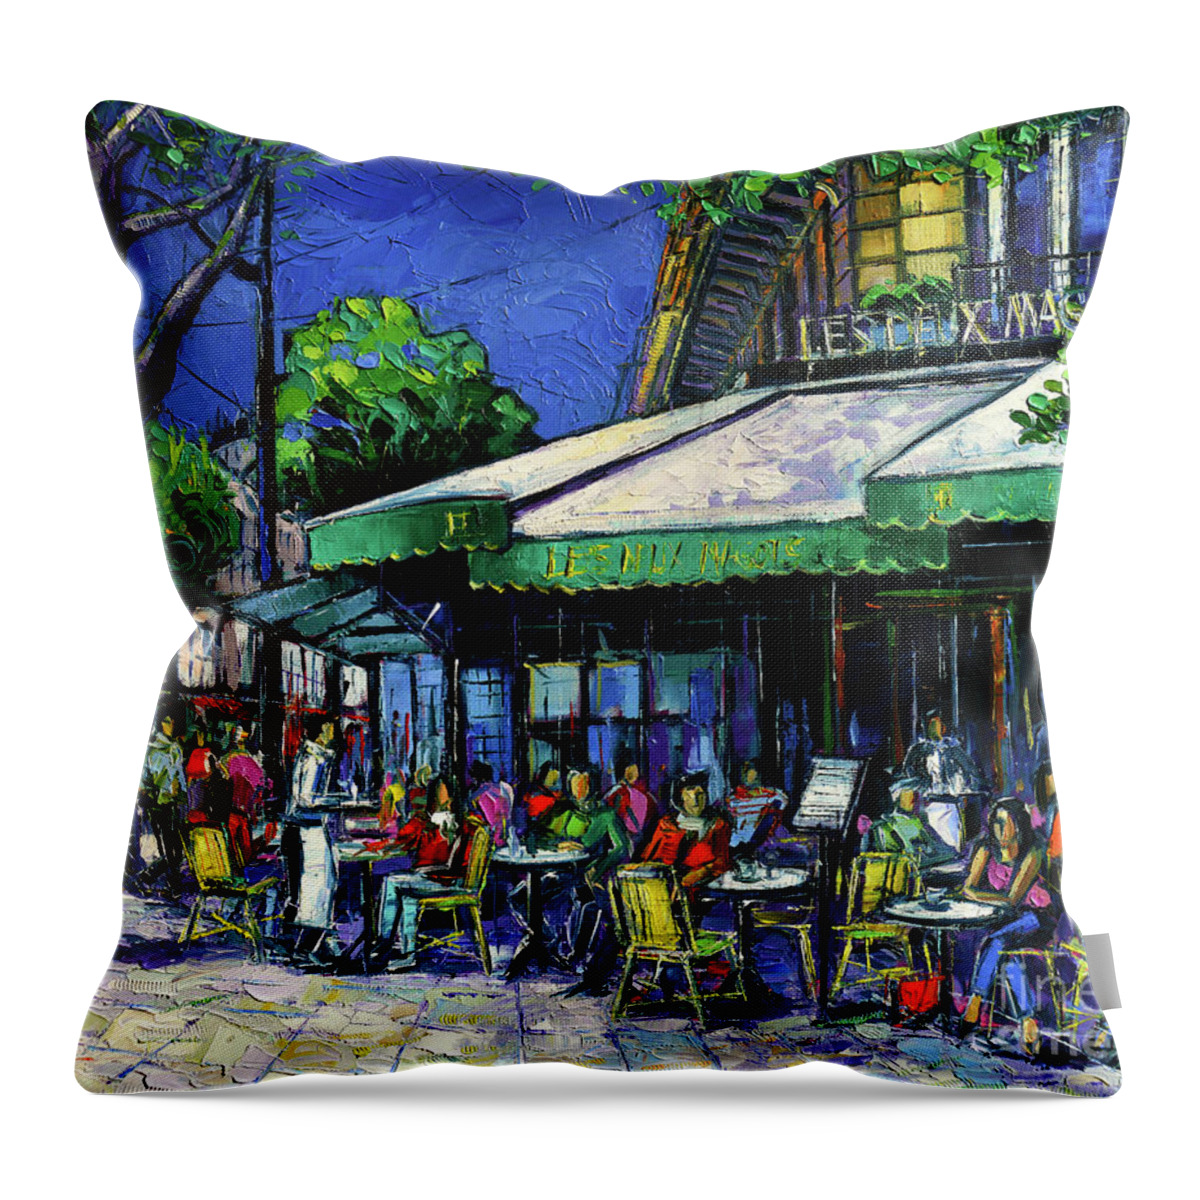 Les Deux Magots Throw Pillow featuring the painting Parisian Cafe by Mona Edulesco